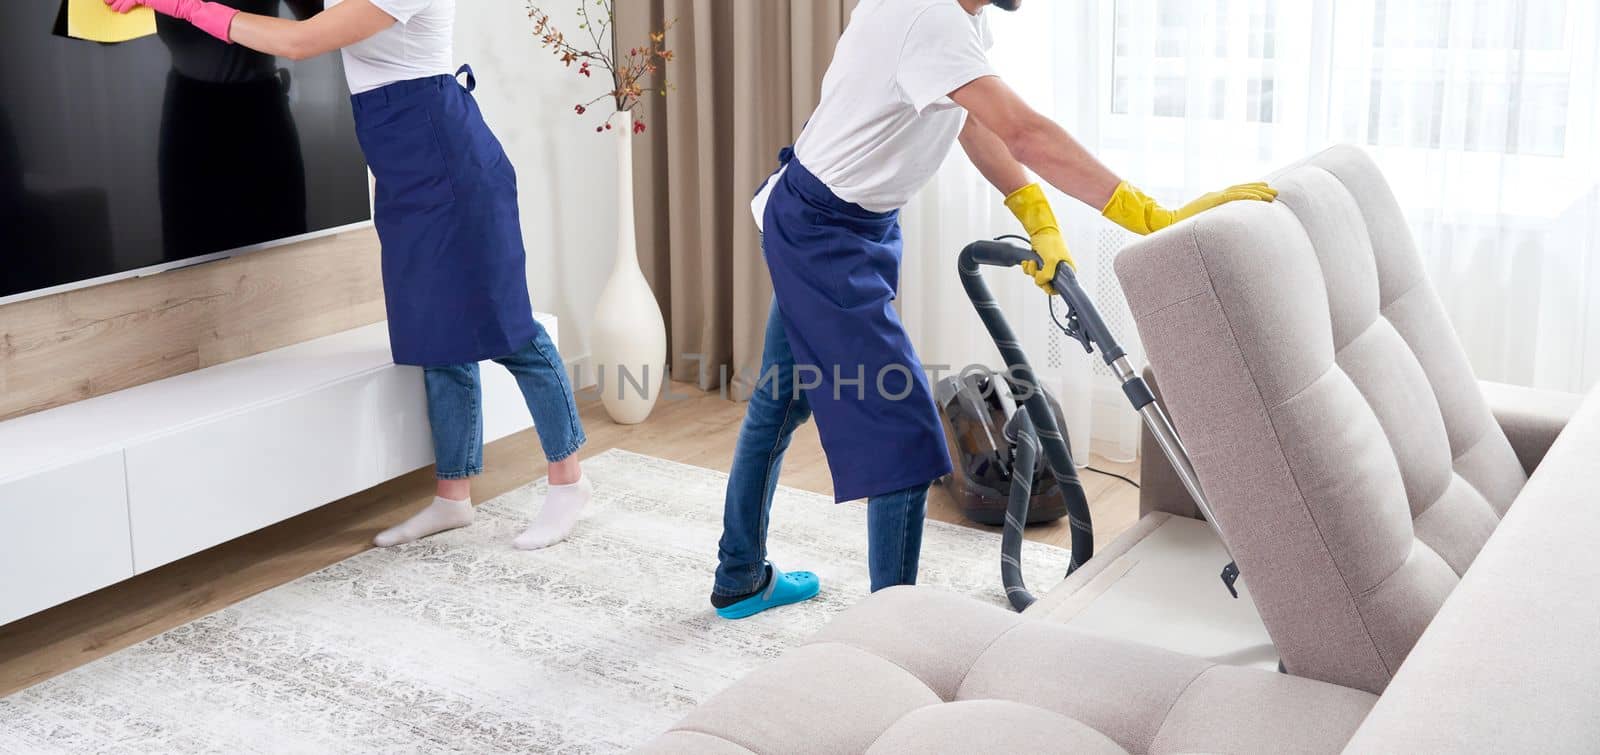 Professional cleaners washing floor and wiping dust from the furniture in the living room of the apartment. Cleaning service concept